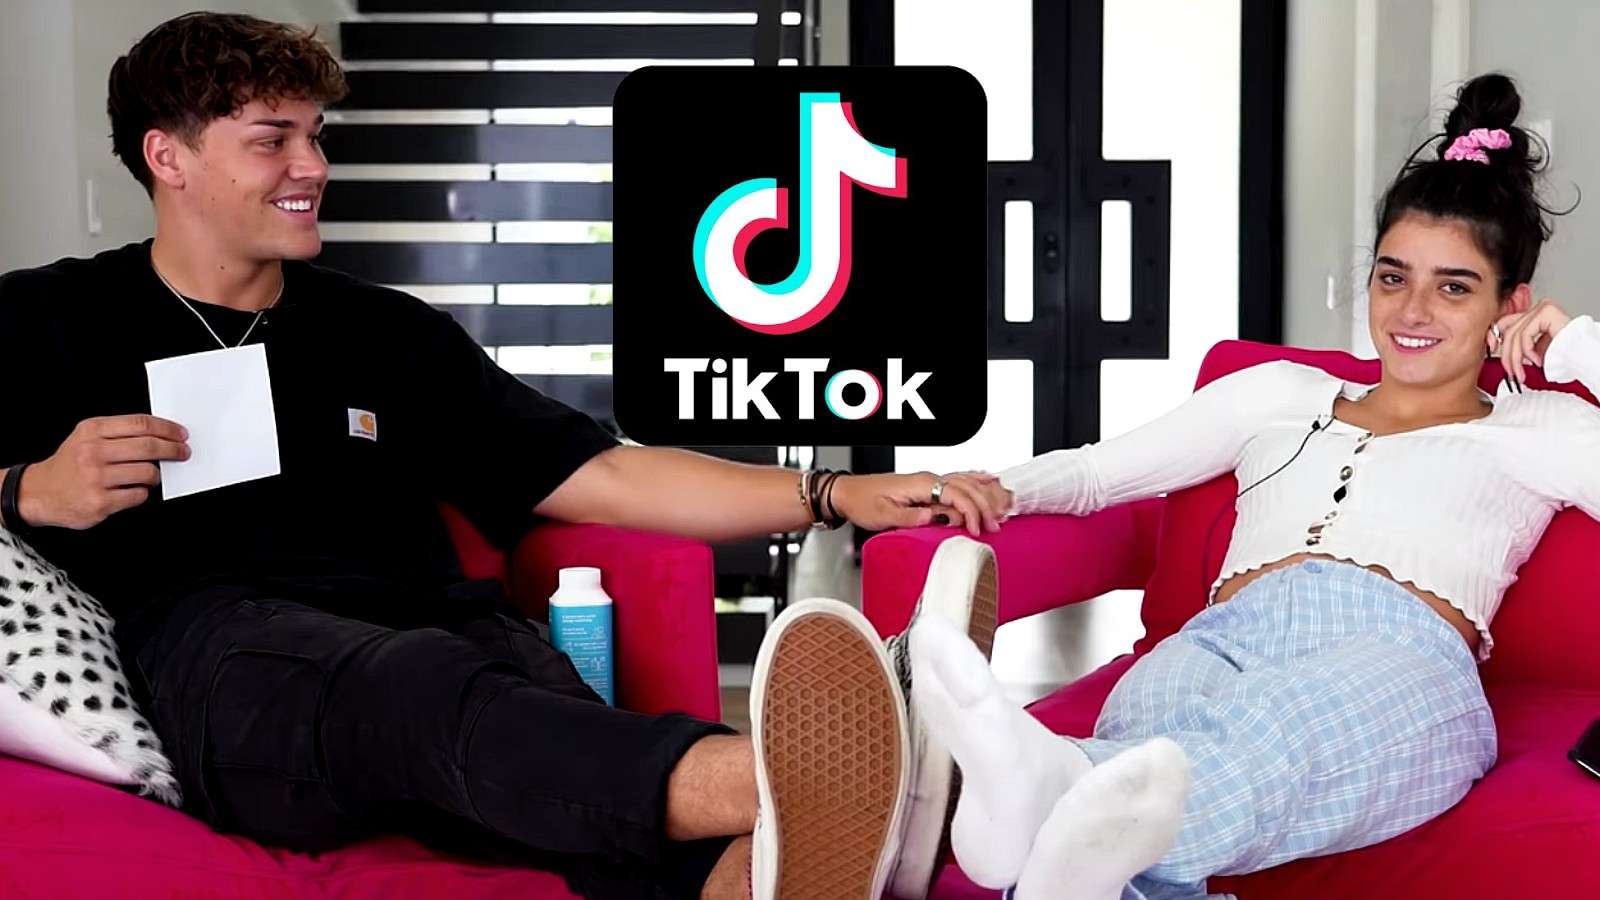 Dixie and Noah holding hands by TikTok logo